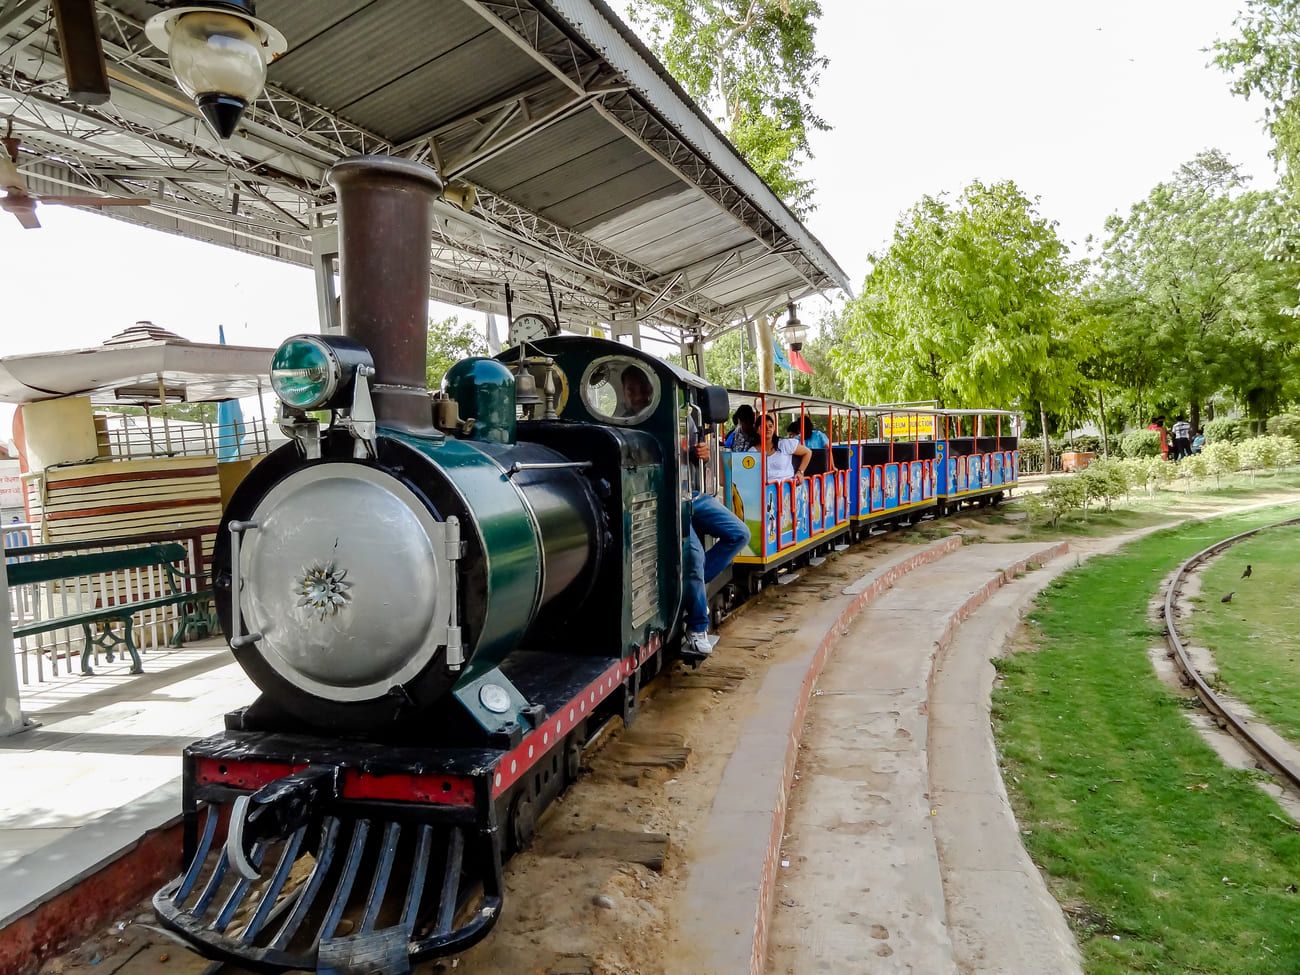 Train with a vintage steam engine entertains visitors at the Rail Museum, New Delhi 